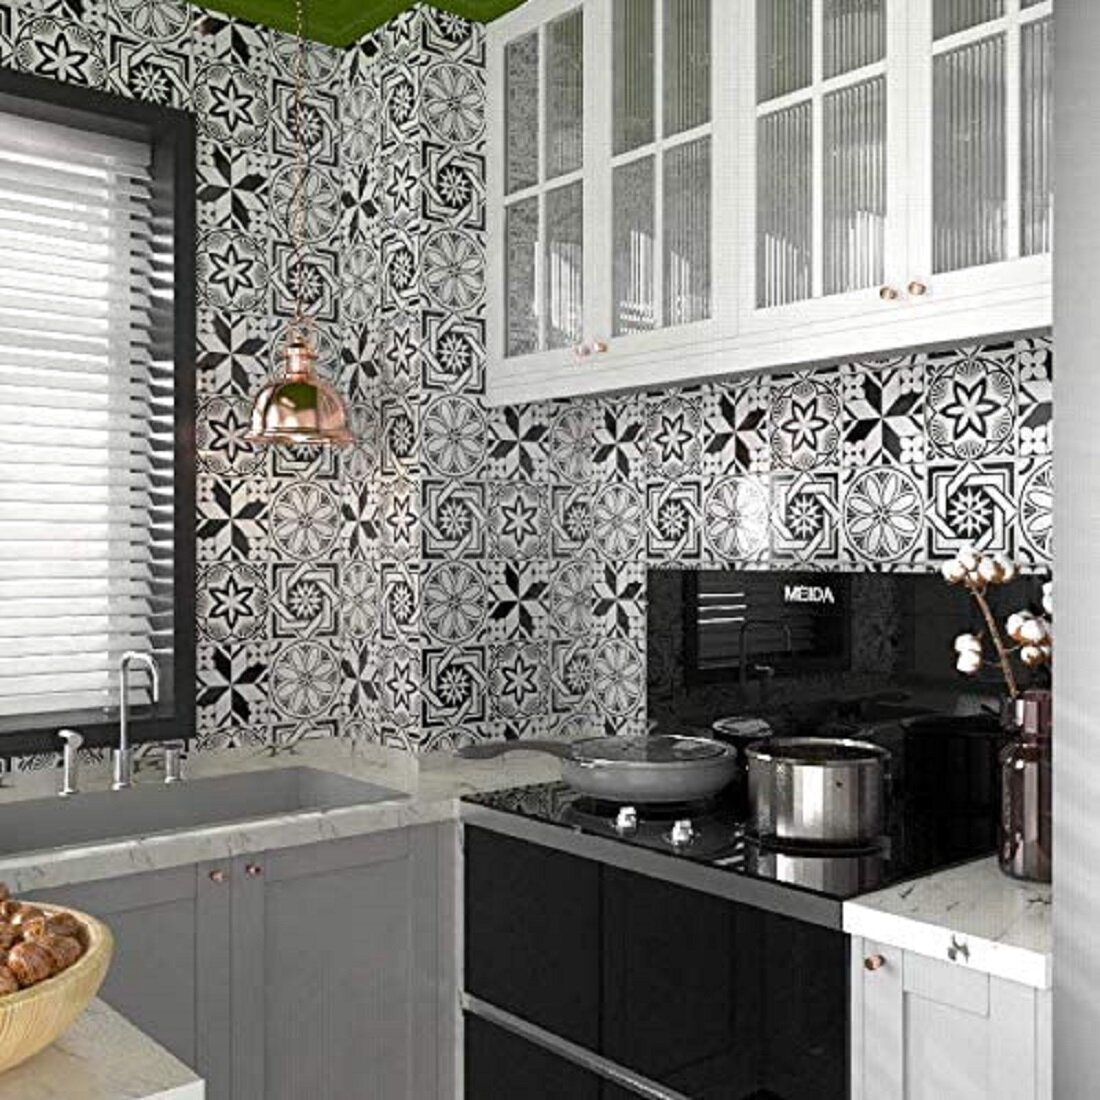 20 sheet Peel And Stick Tile Backsplash, 20d Self adhesive Wall Tlie,  Removable Waterproof Moroccan Decorative Tiles For Kitchen Bathroom And  Bedroom, ...